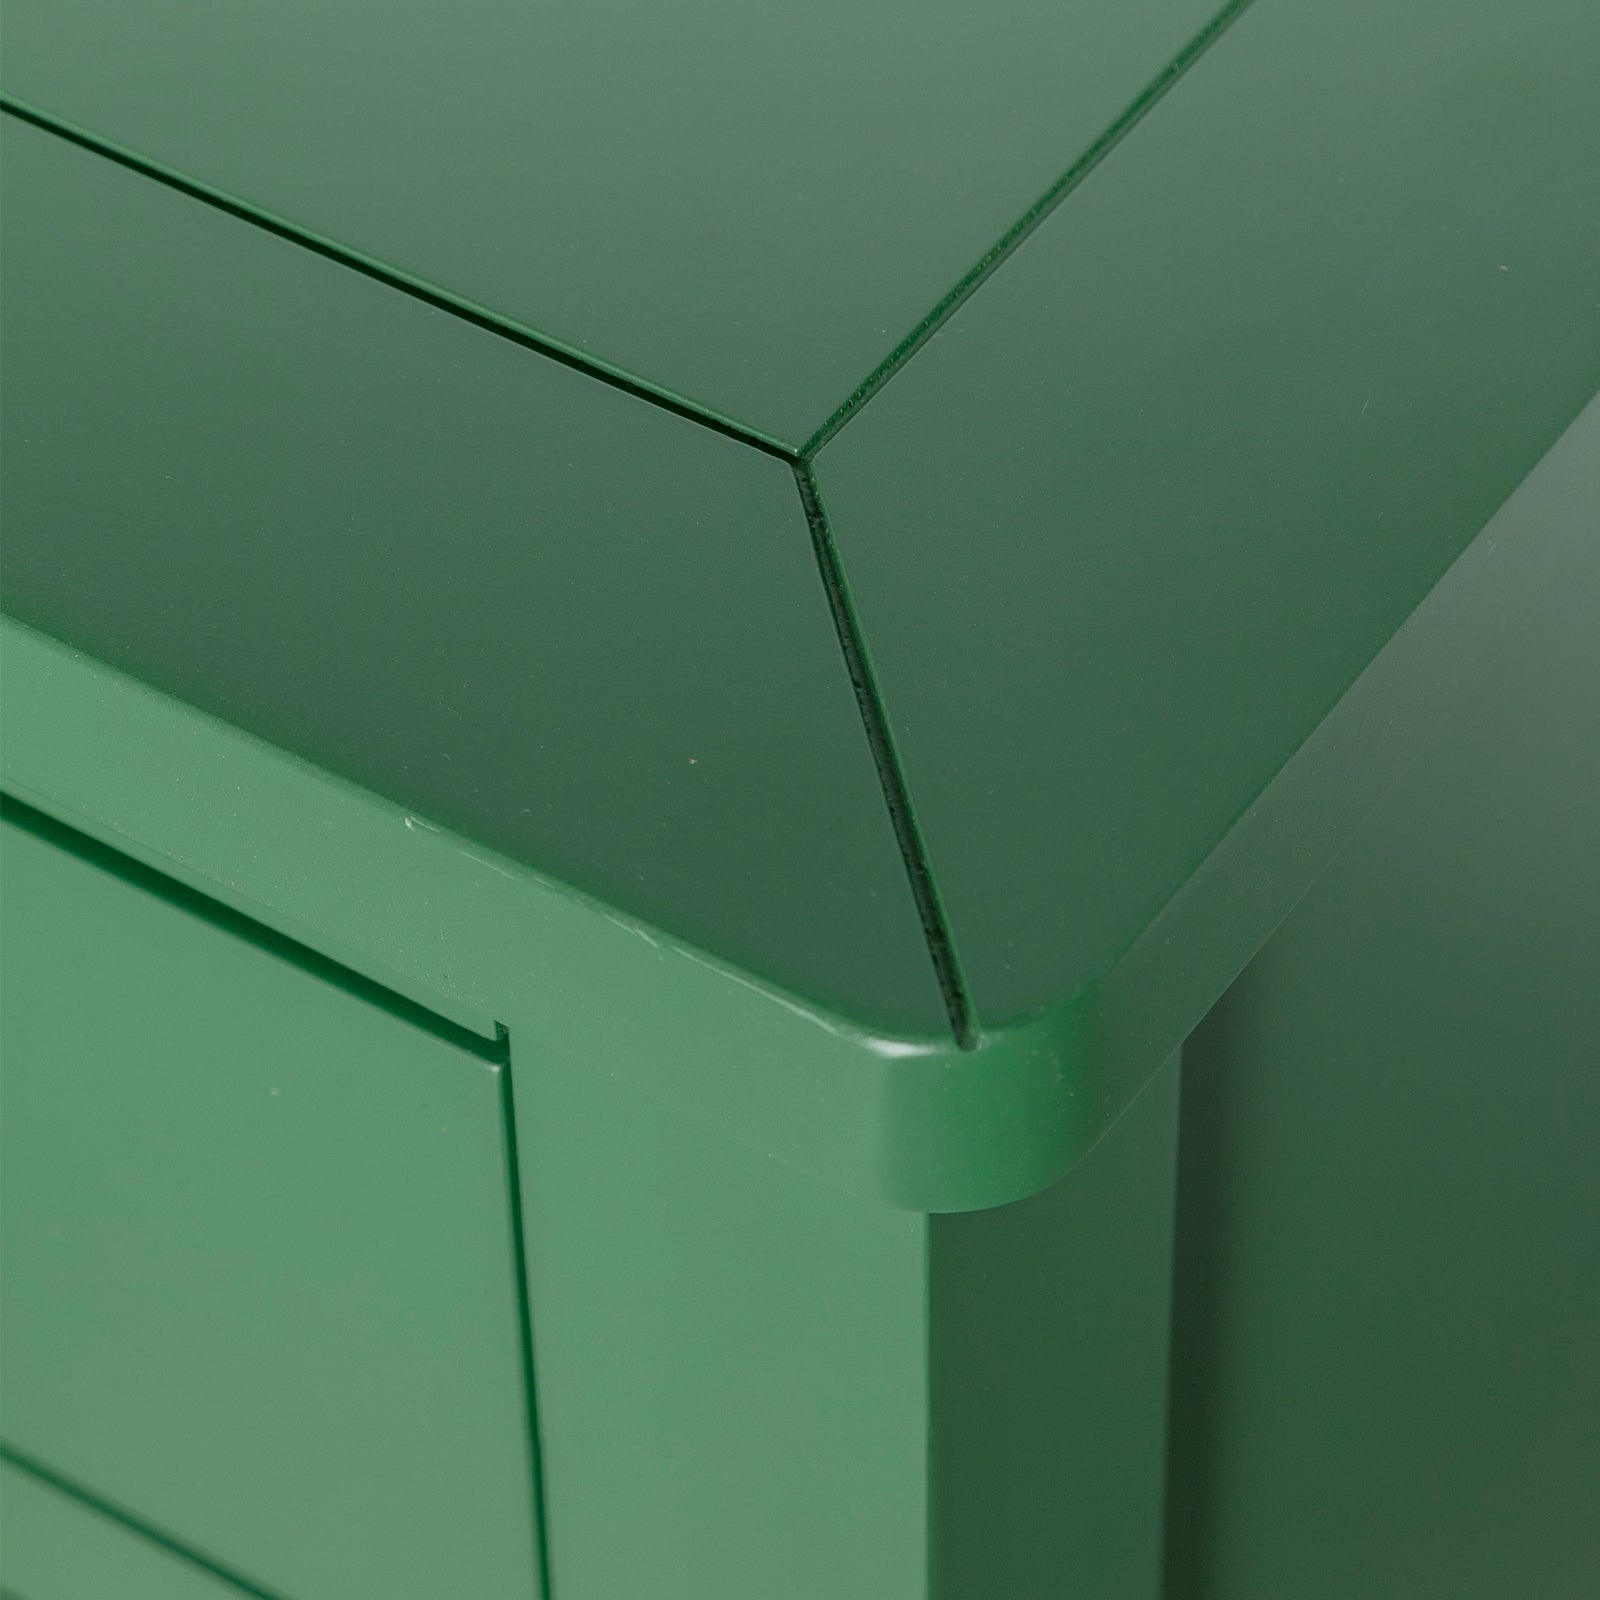 Manor Green 1 Drawer Bedside Table